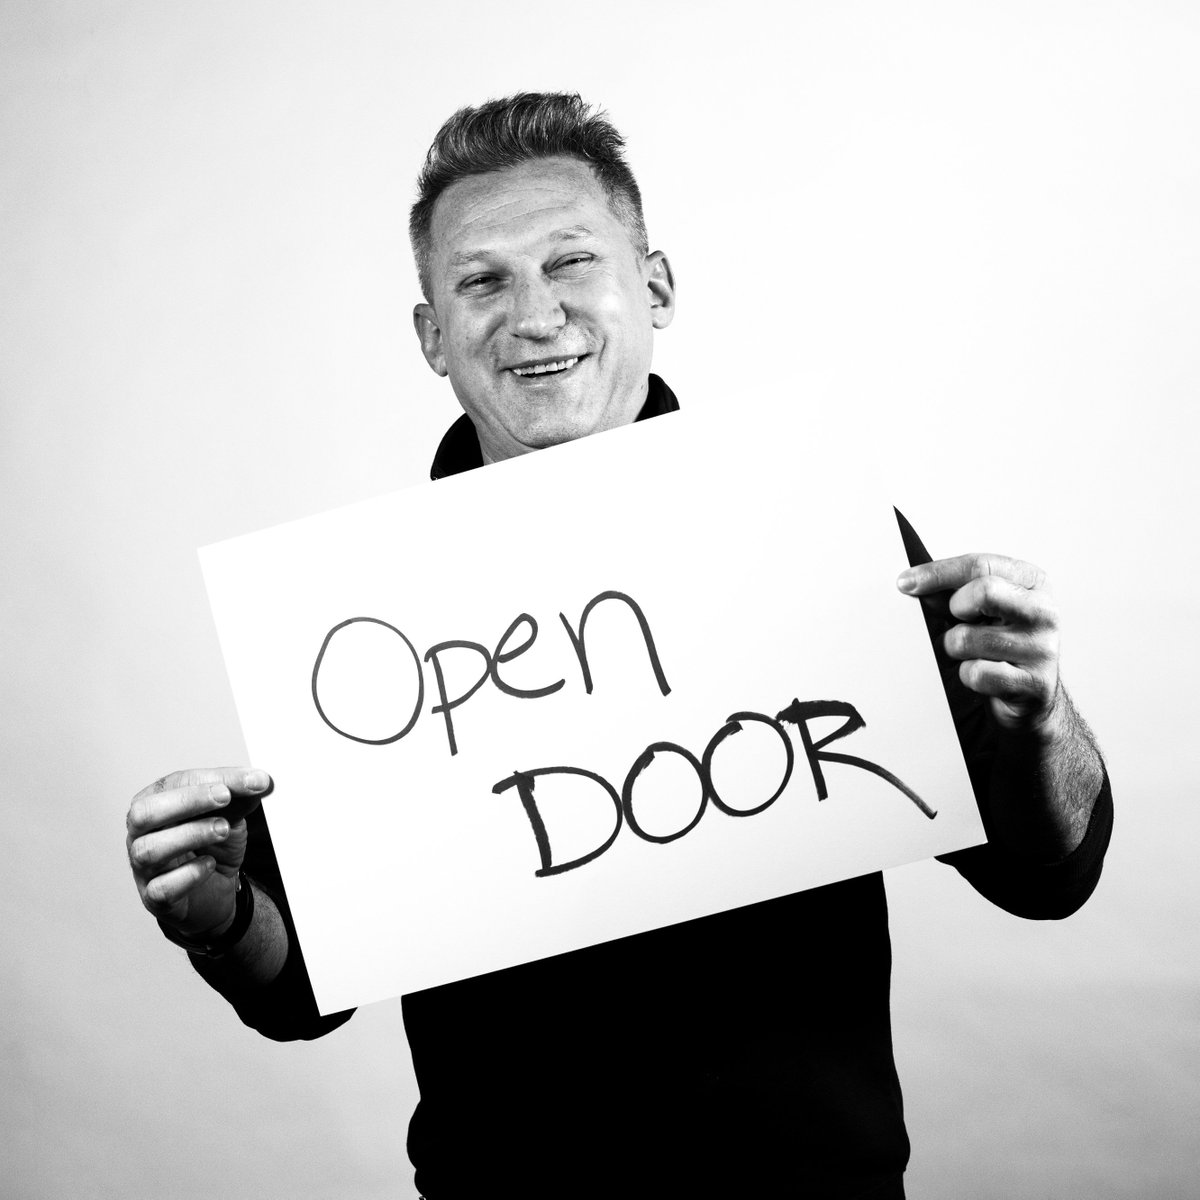 Our ethos is that we are open access. We do not require referrals or paperwork. Simply come to any drop in centre to speak to a caseworker to receive professional support. #open #homeless